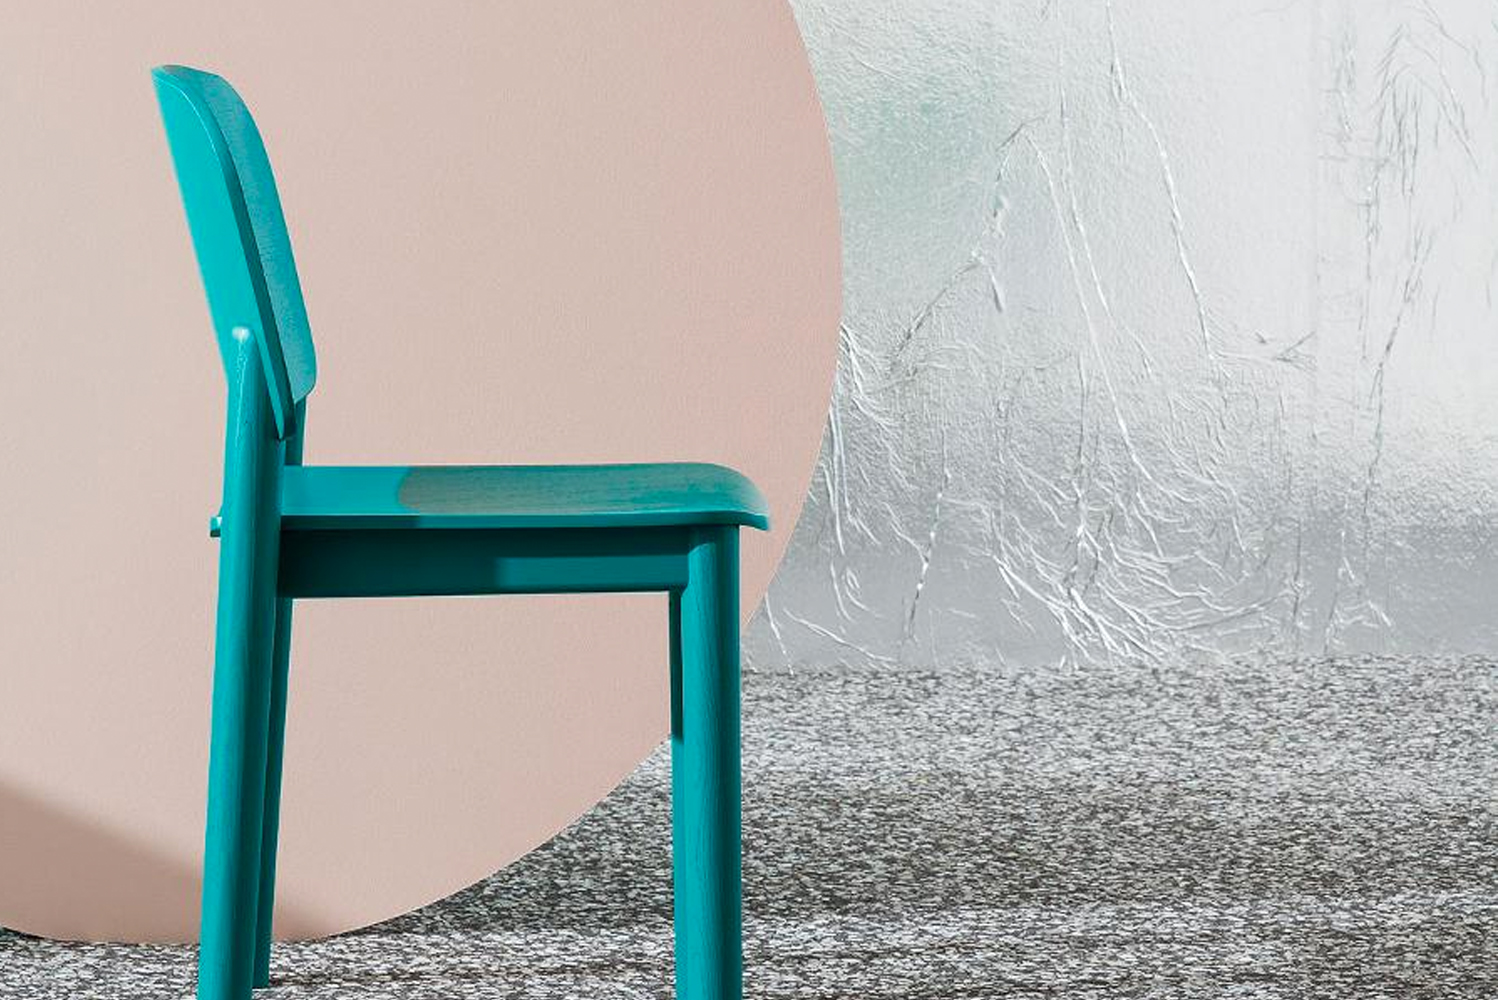 Introducing the White chair from Billiani 